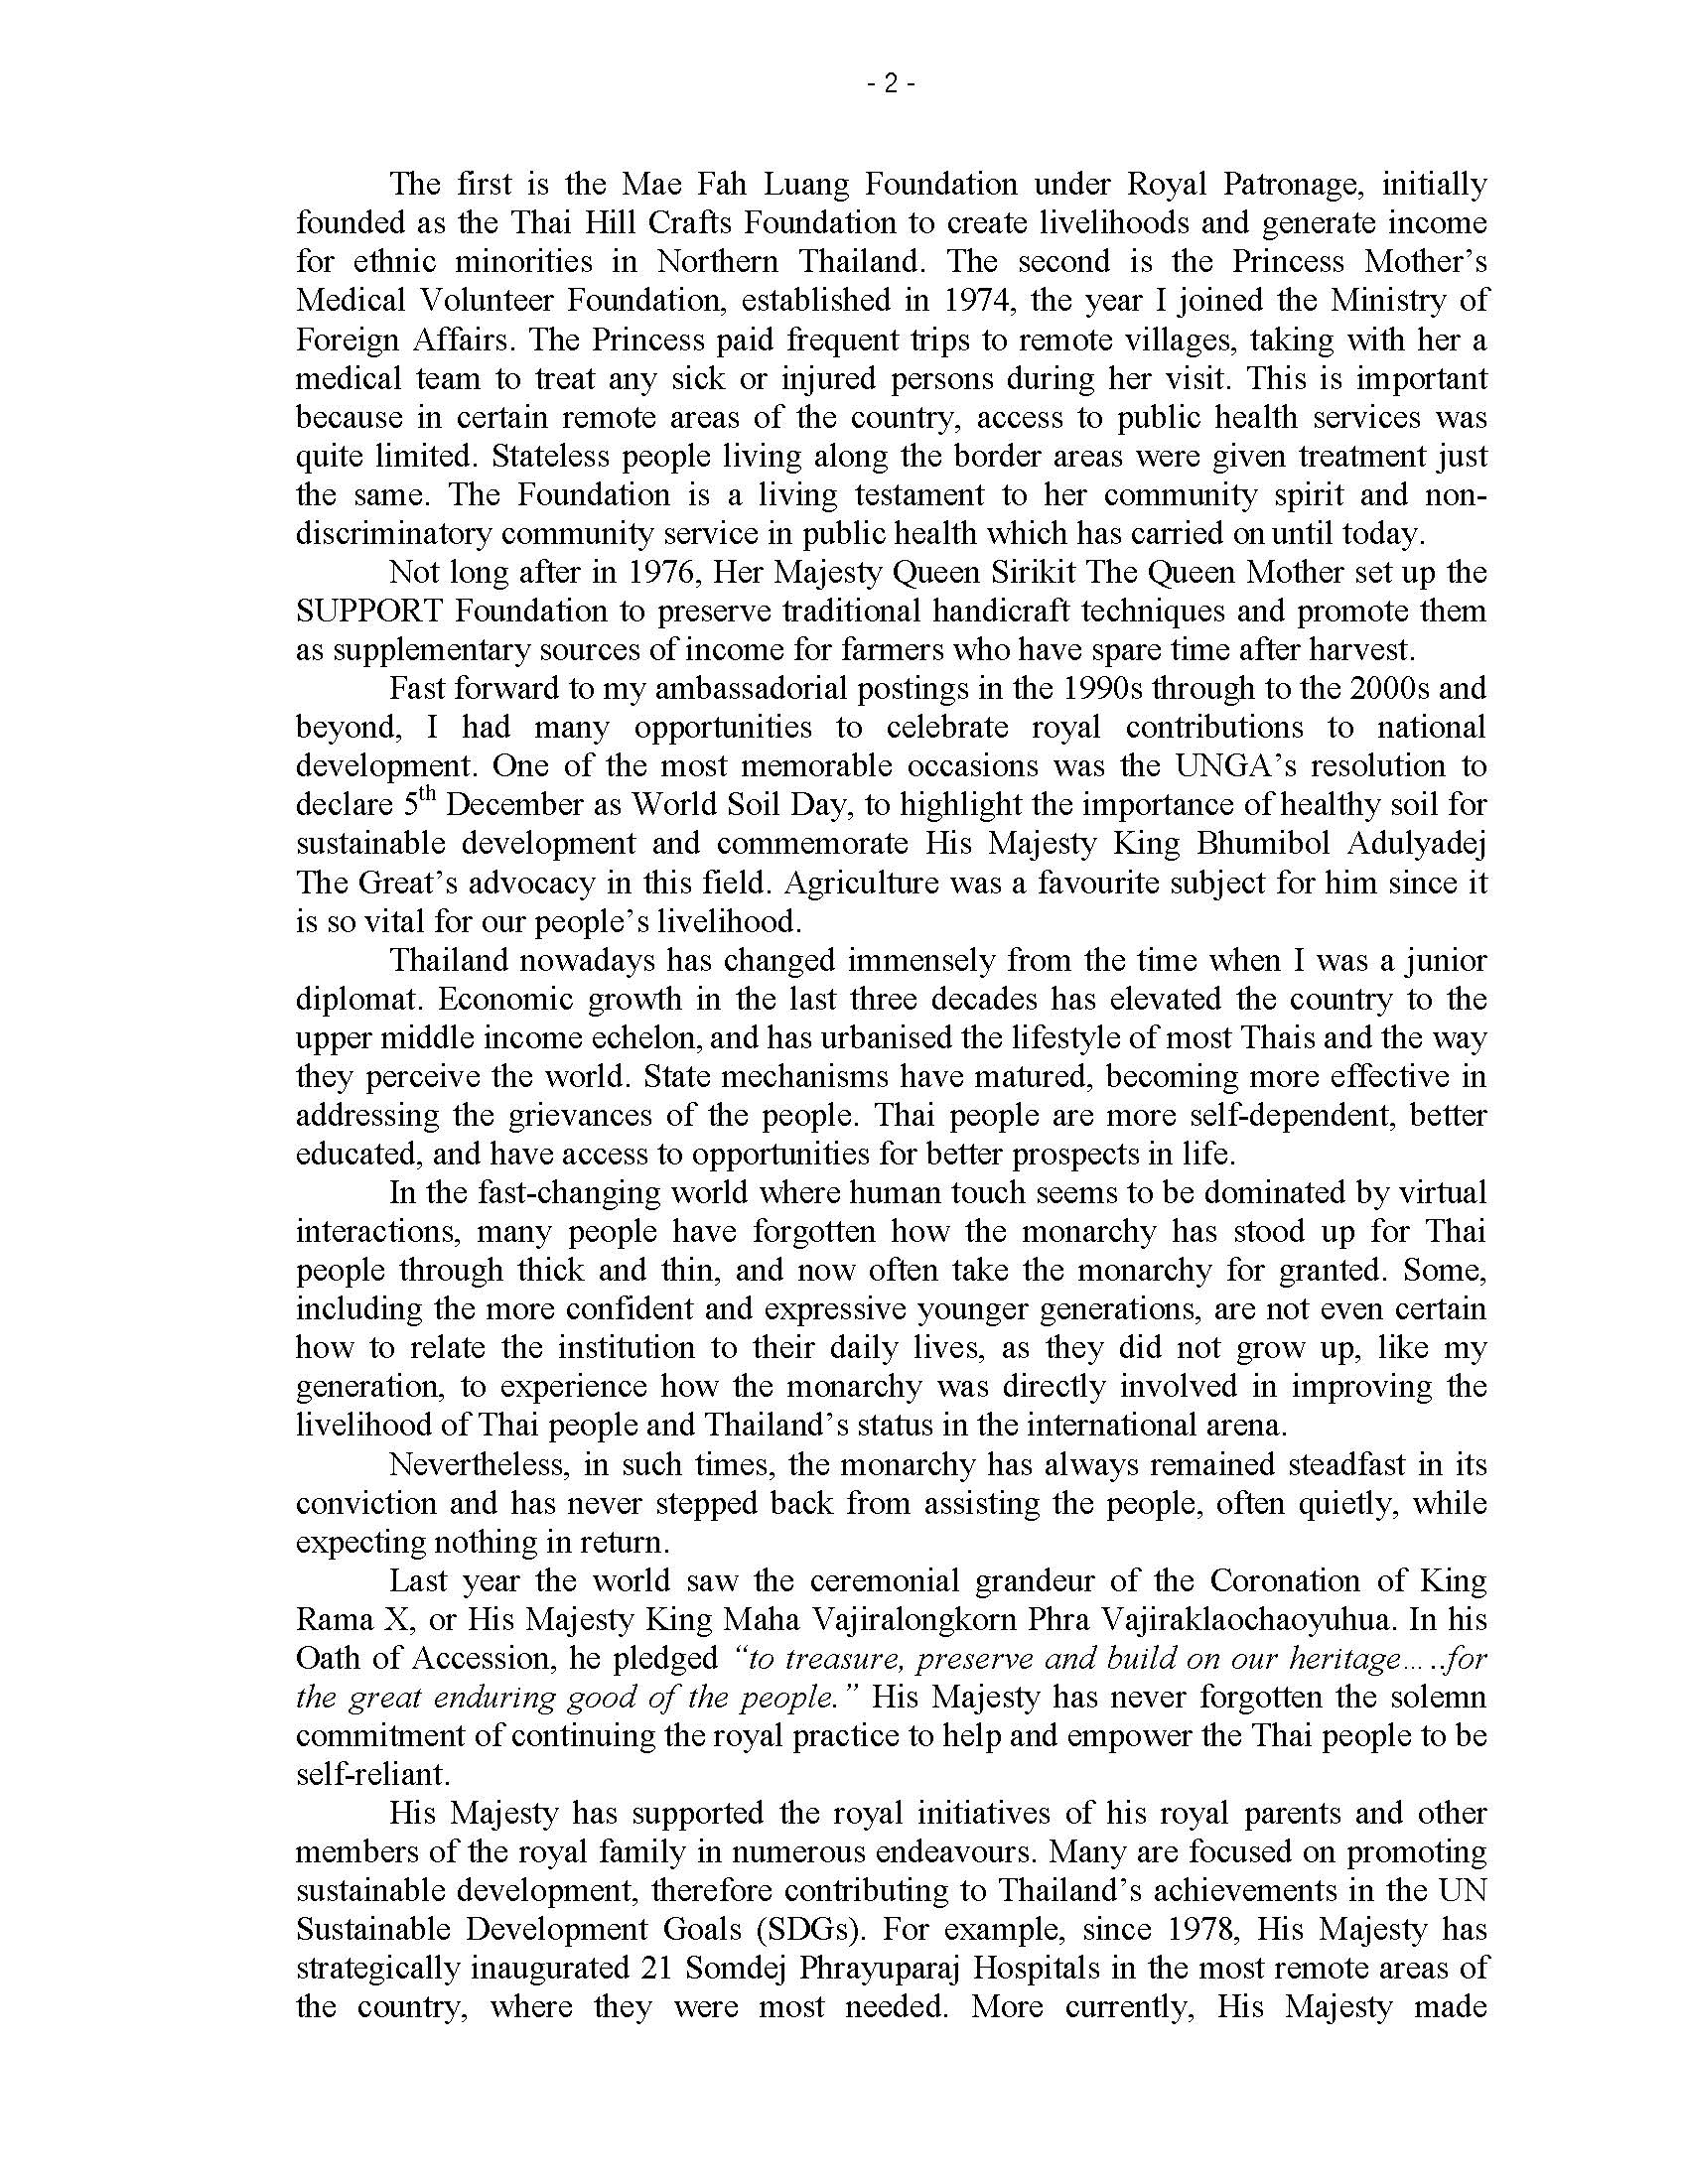 03DEC20_Article_for_Thai_National_Day_2563_FM_revised_Page_2